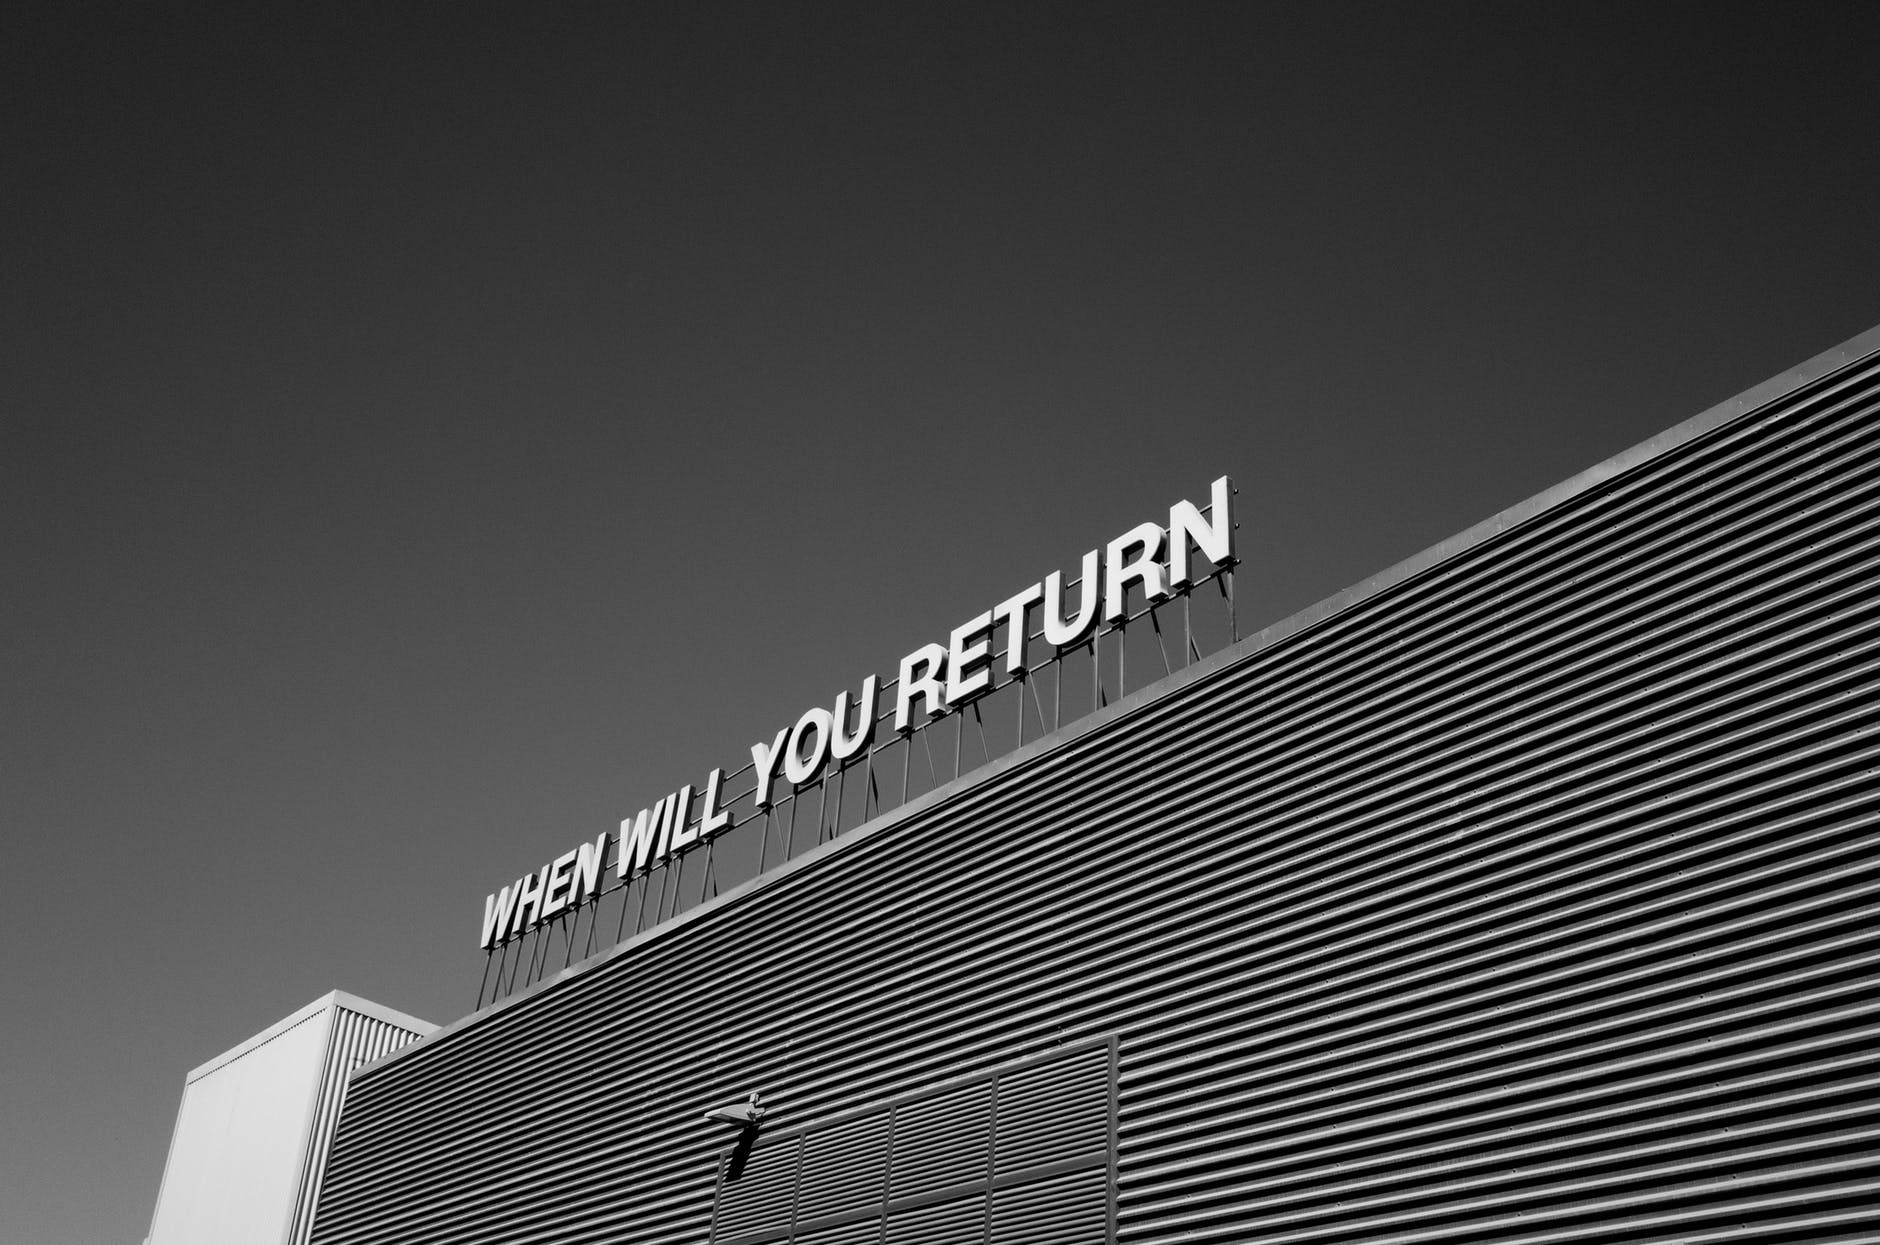 Sign on the roof of a building saying 'when will you return'